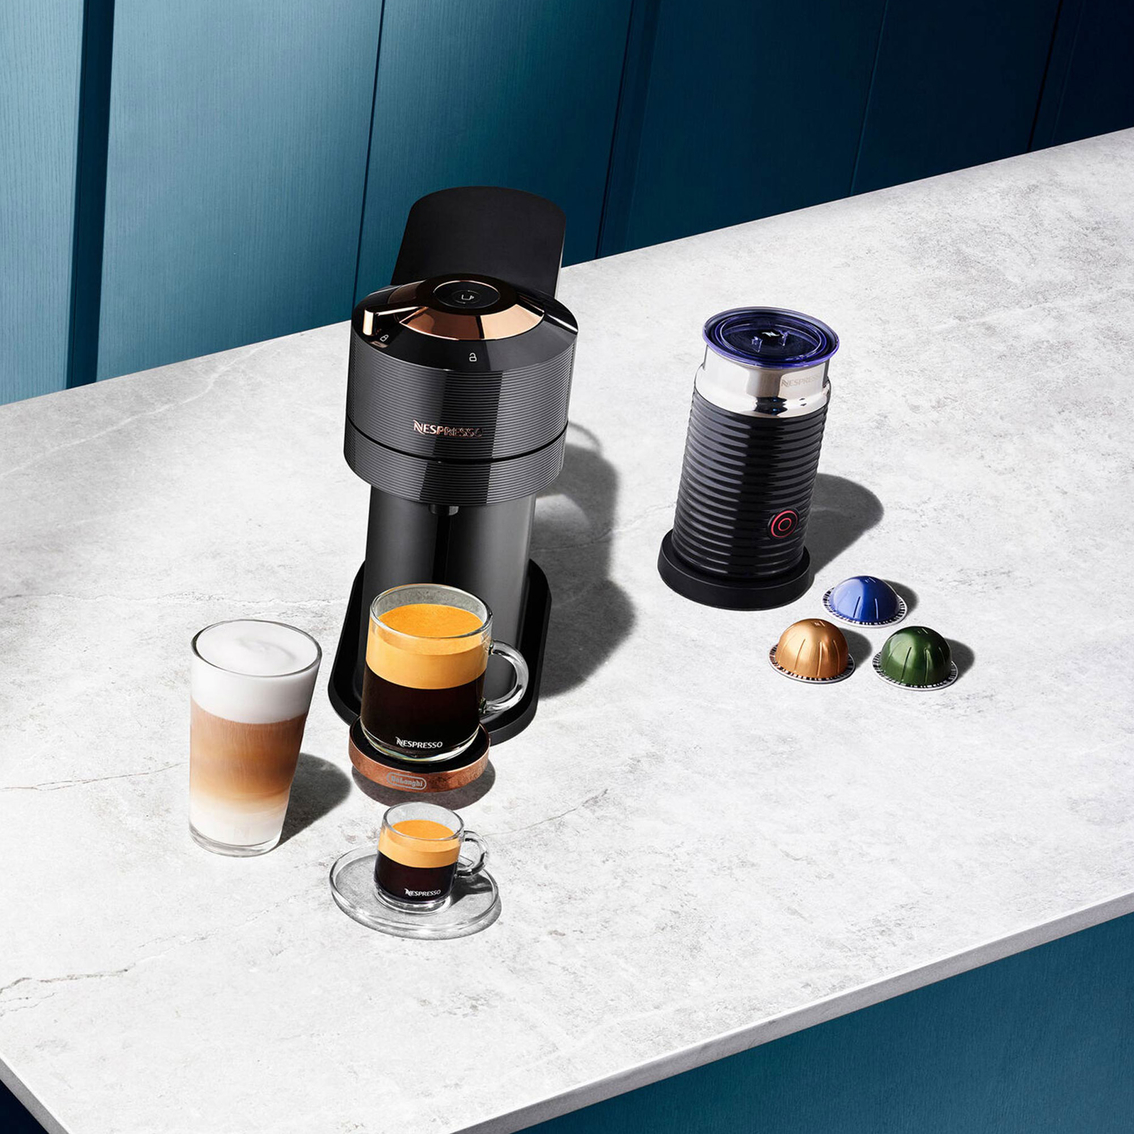 Nespresso by De'Longhi Premium Coffee and Espresso Maker with Milk Frother - Image 7 of 7